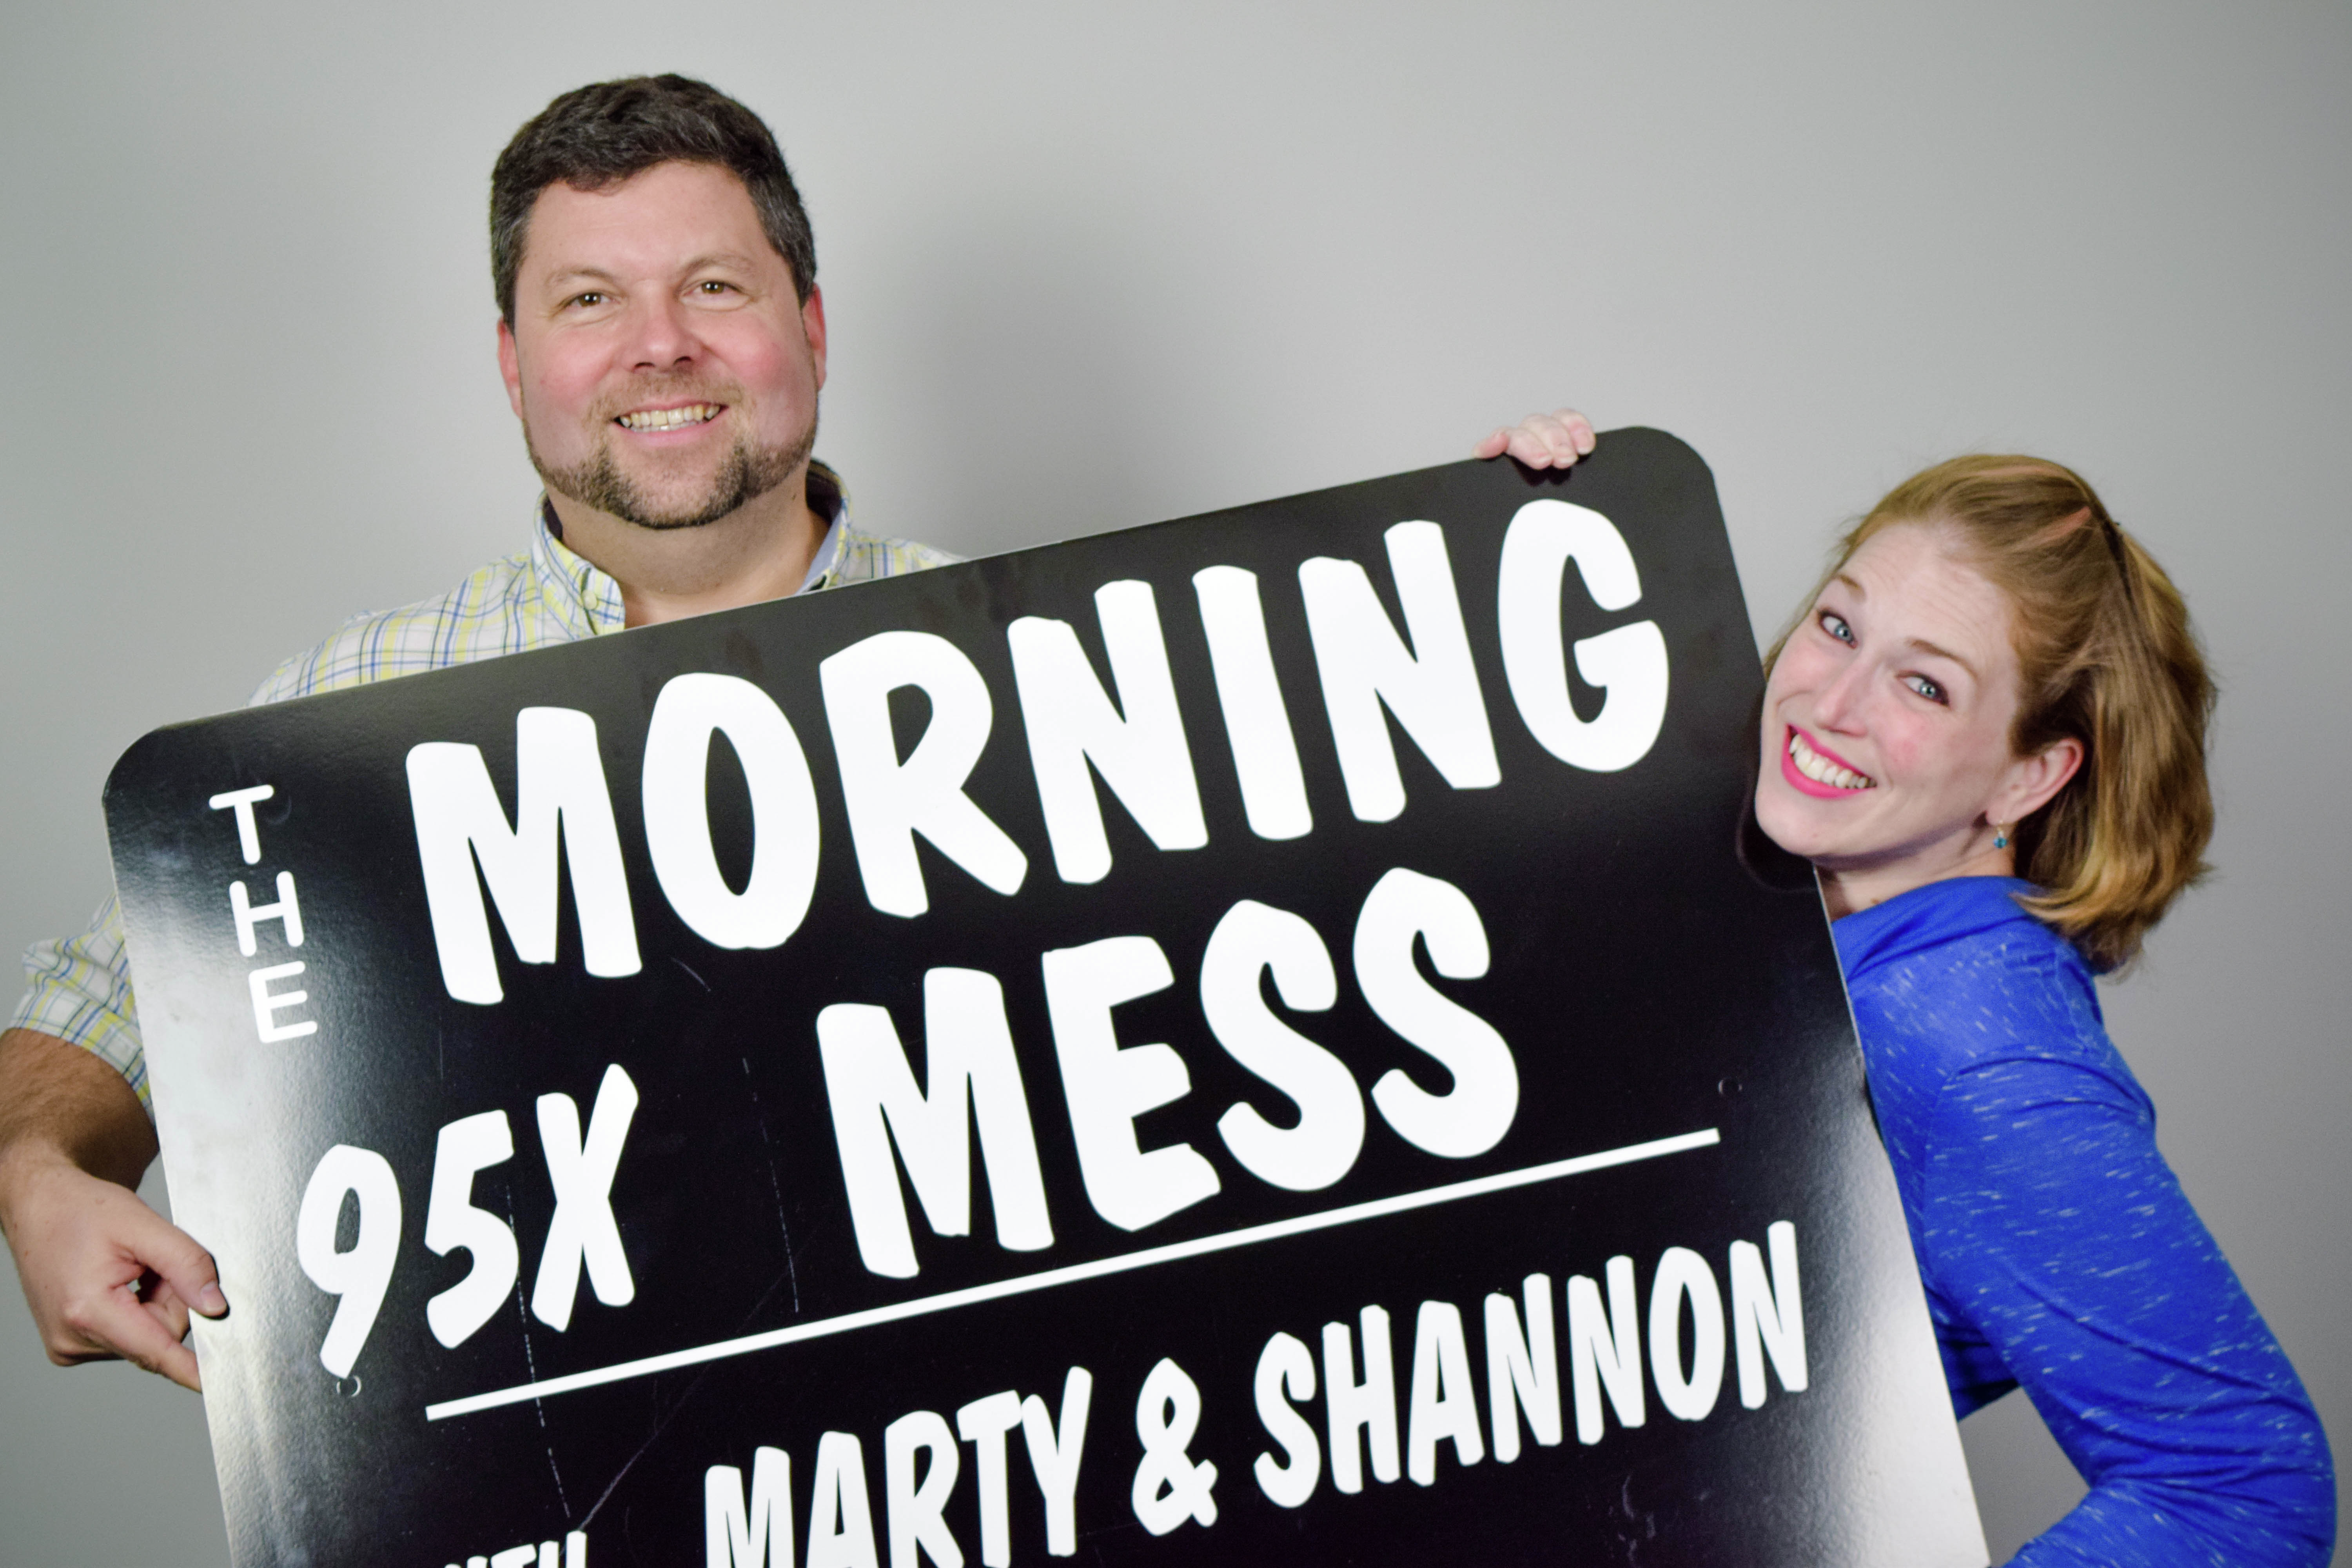 Marty & Shannon talk about a lady who married a ghost